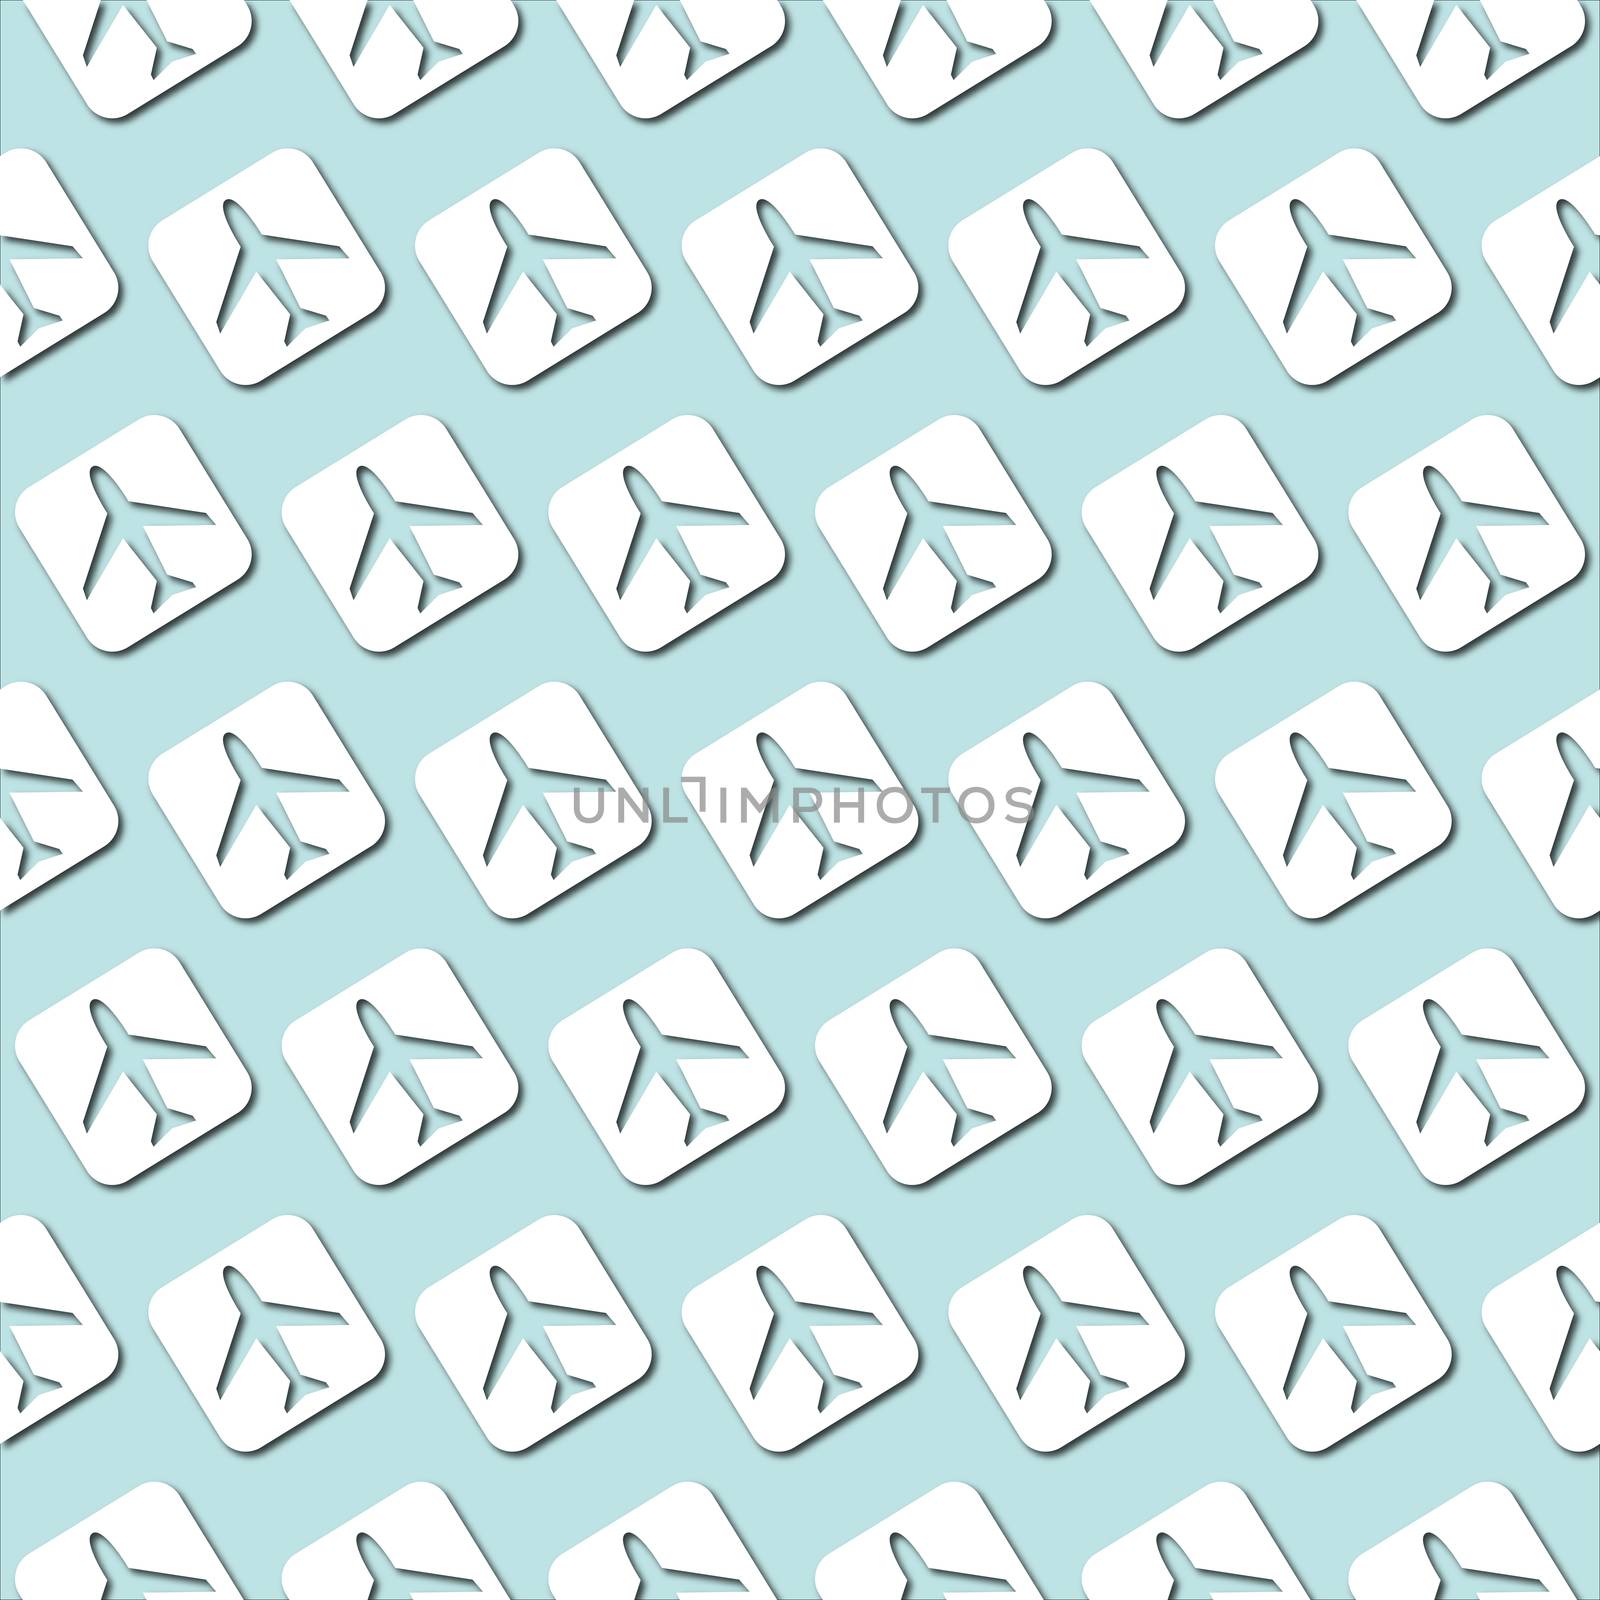 White plane icon on pale blue turquoise background, seamless pattern. Paper cut style with drop shadows by Pashchenko